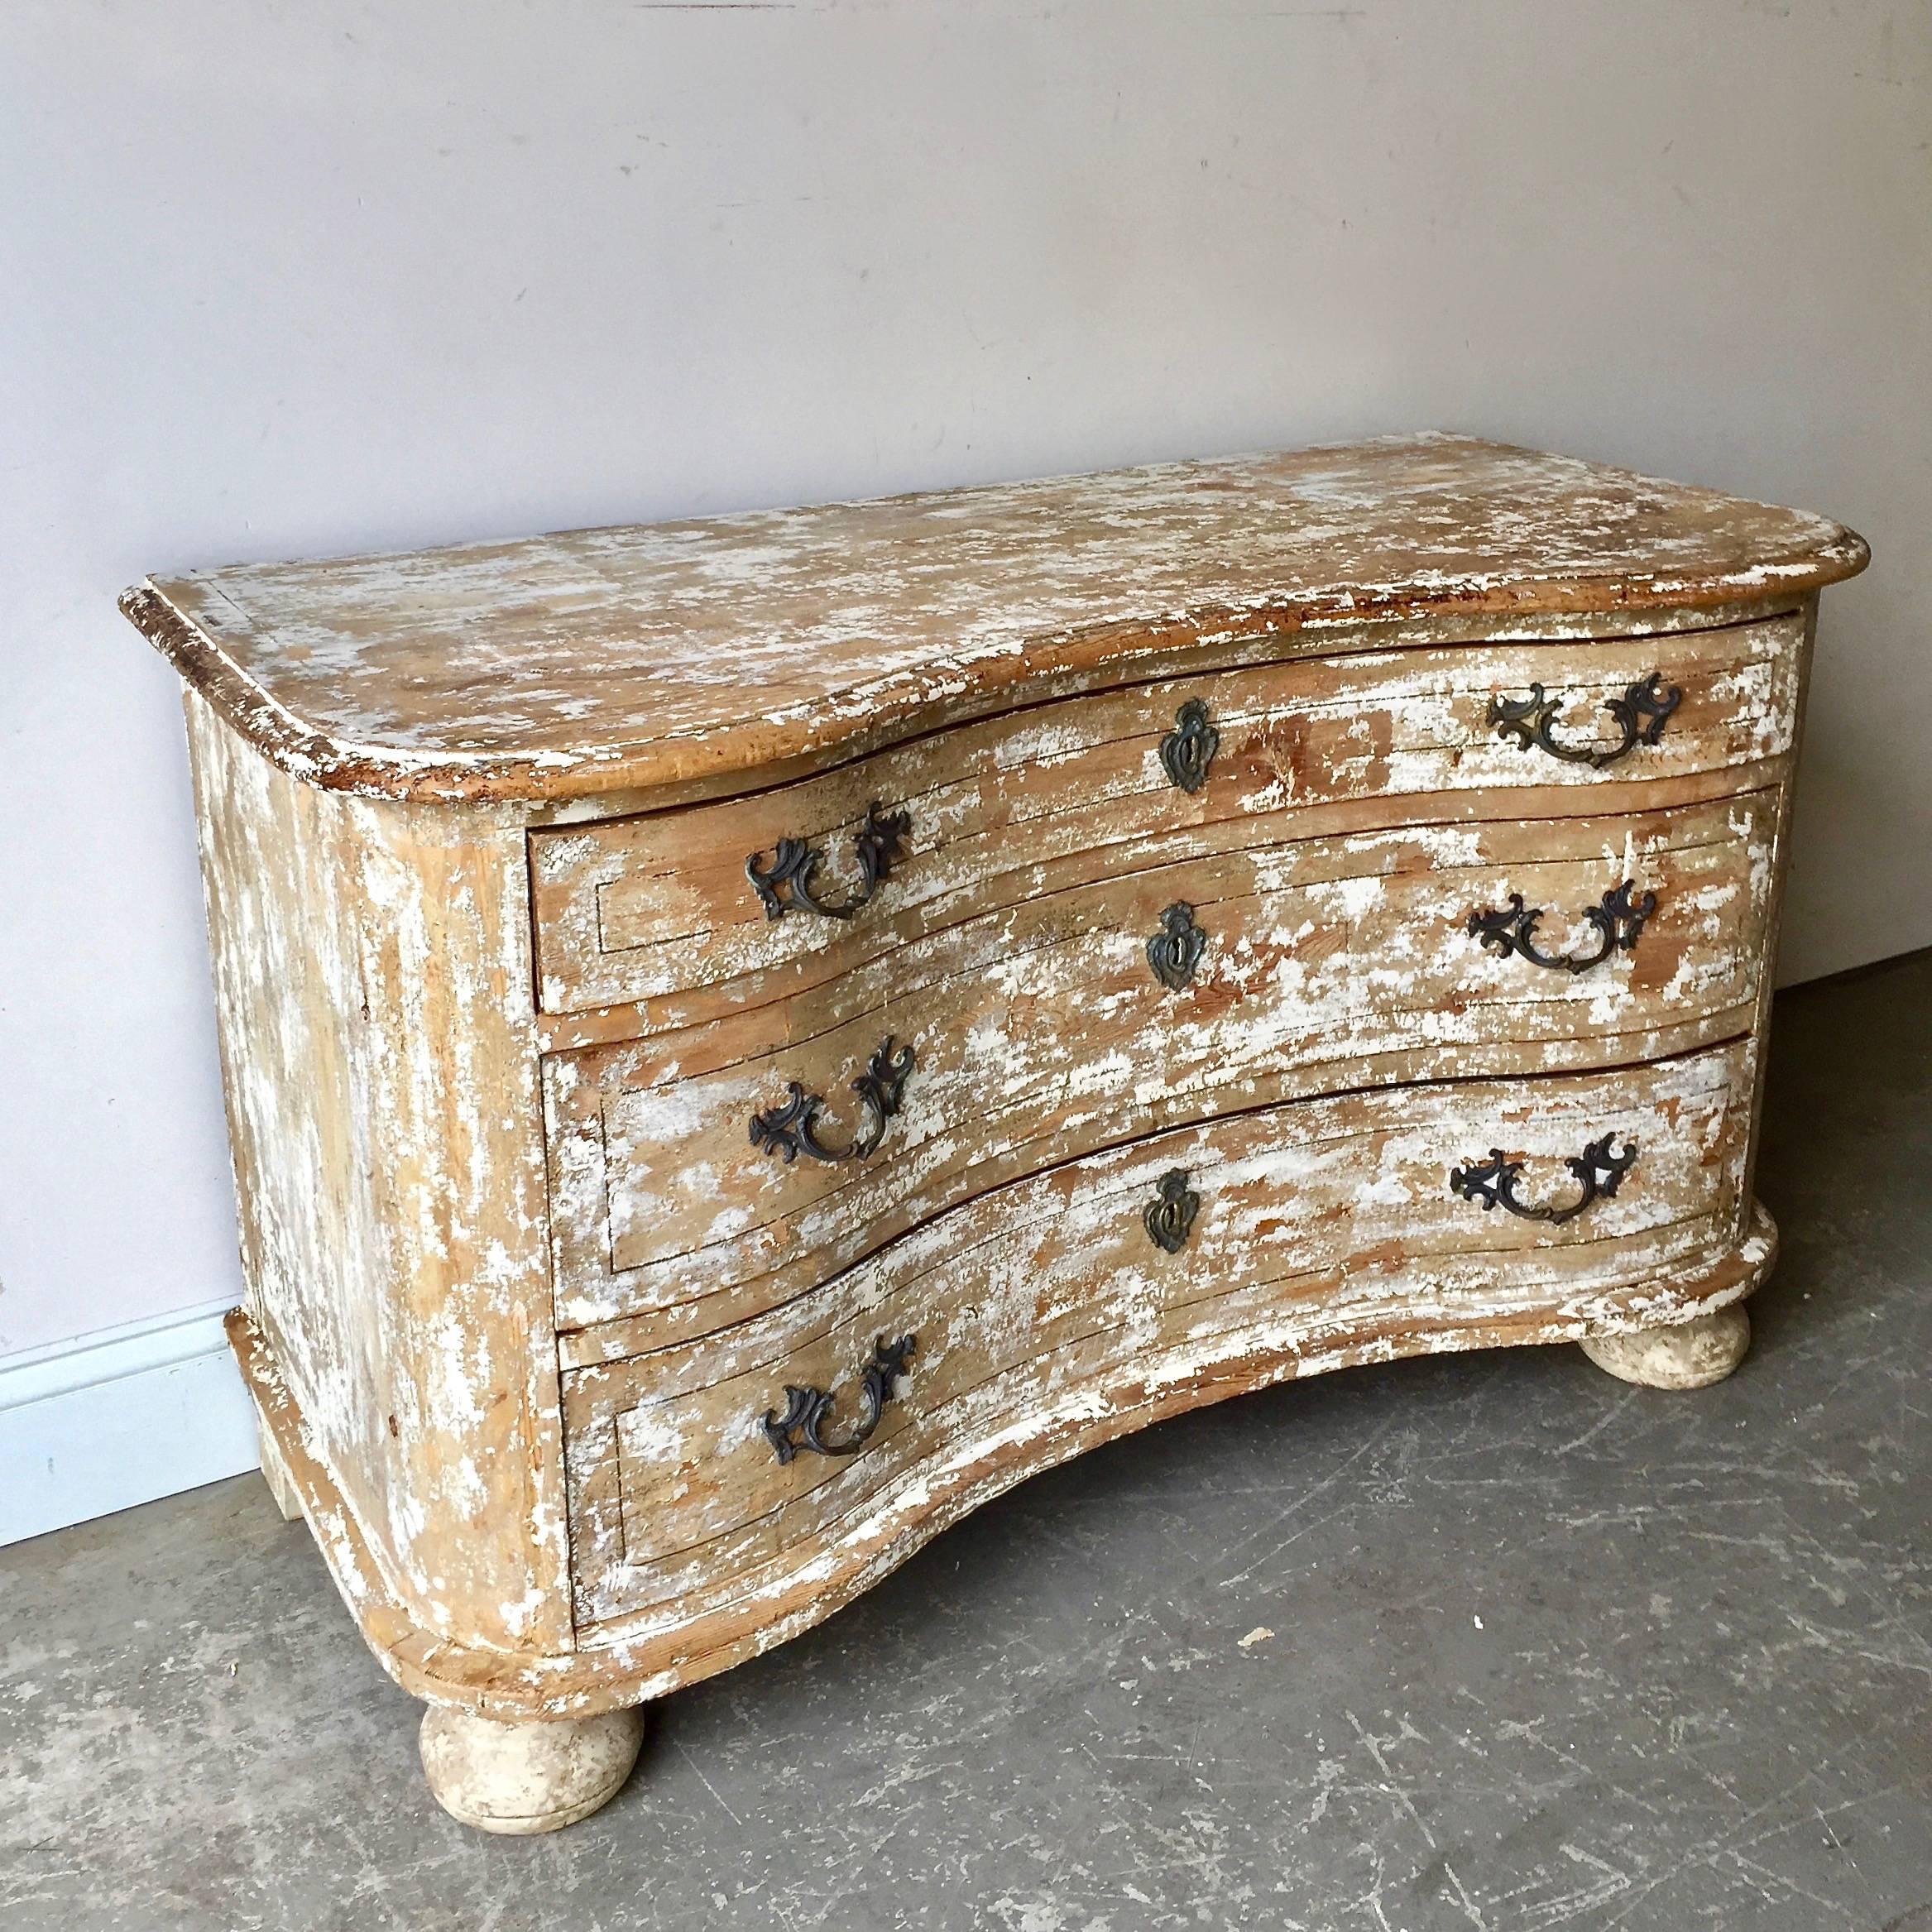 18th century low chest of drawers from late Baroque period in richly carved curvaceous serpentine drawer fronts, with handsome bronze hardwares and shaped top and ball feet ... all in super time worn patina!
Alsace, France.
Here are few examples …